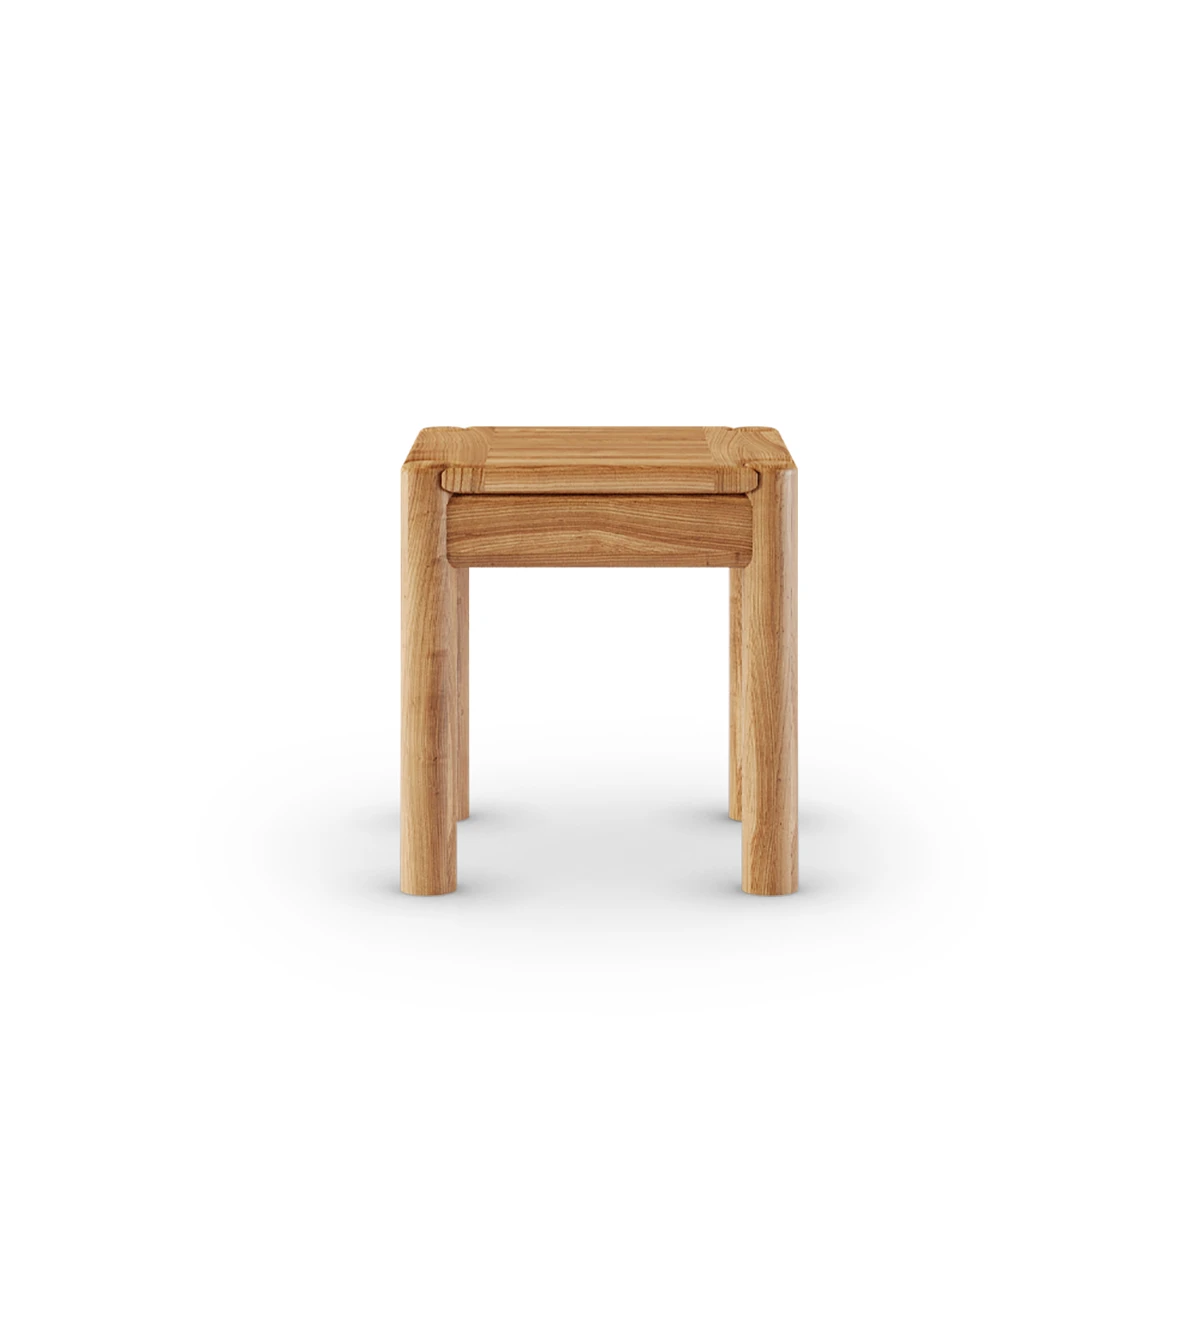 Natural wood square side table